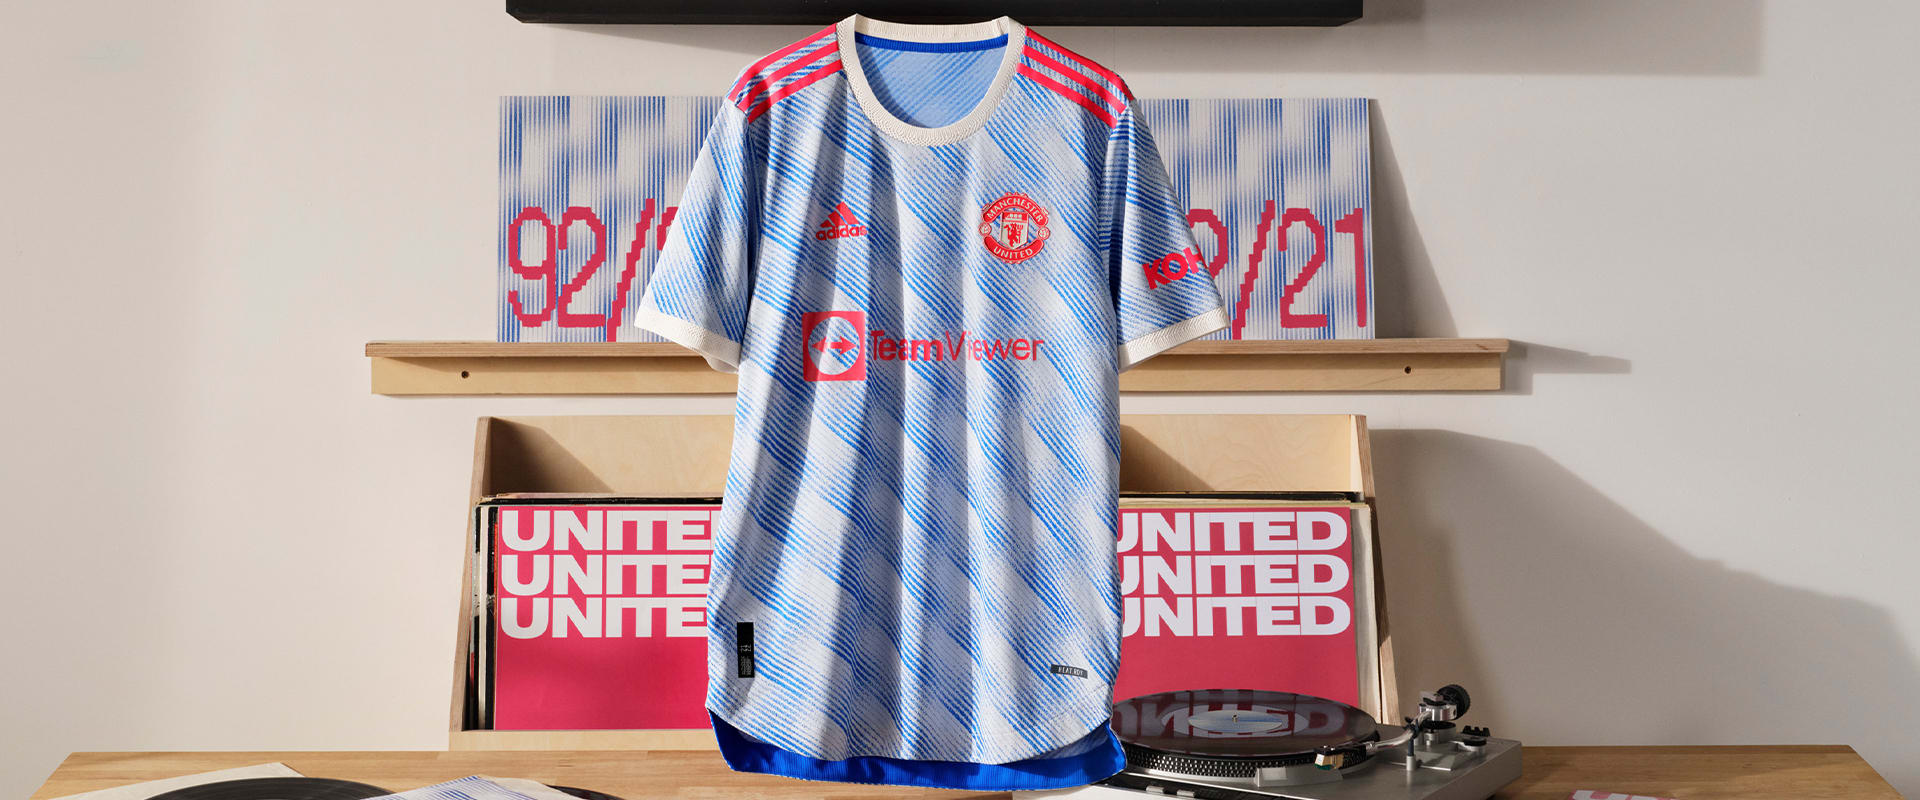 A visual of the Manchester United Away kit